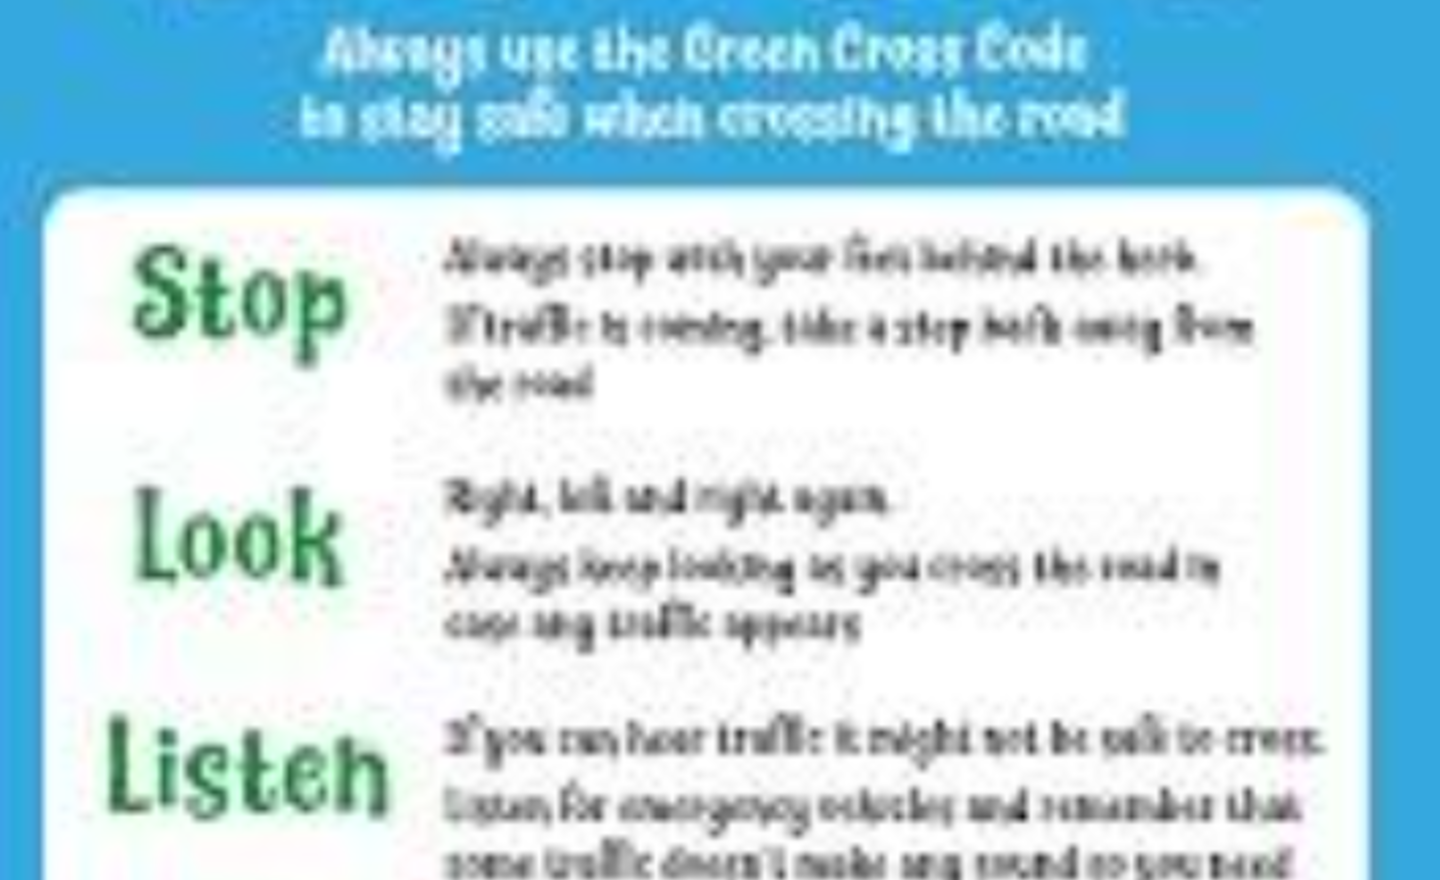 Image of Staying safe- the Green Cross Code with Pajama Drama